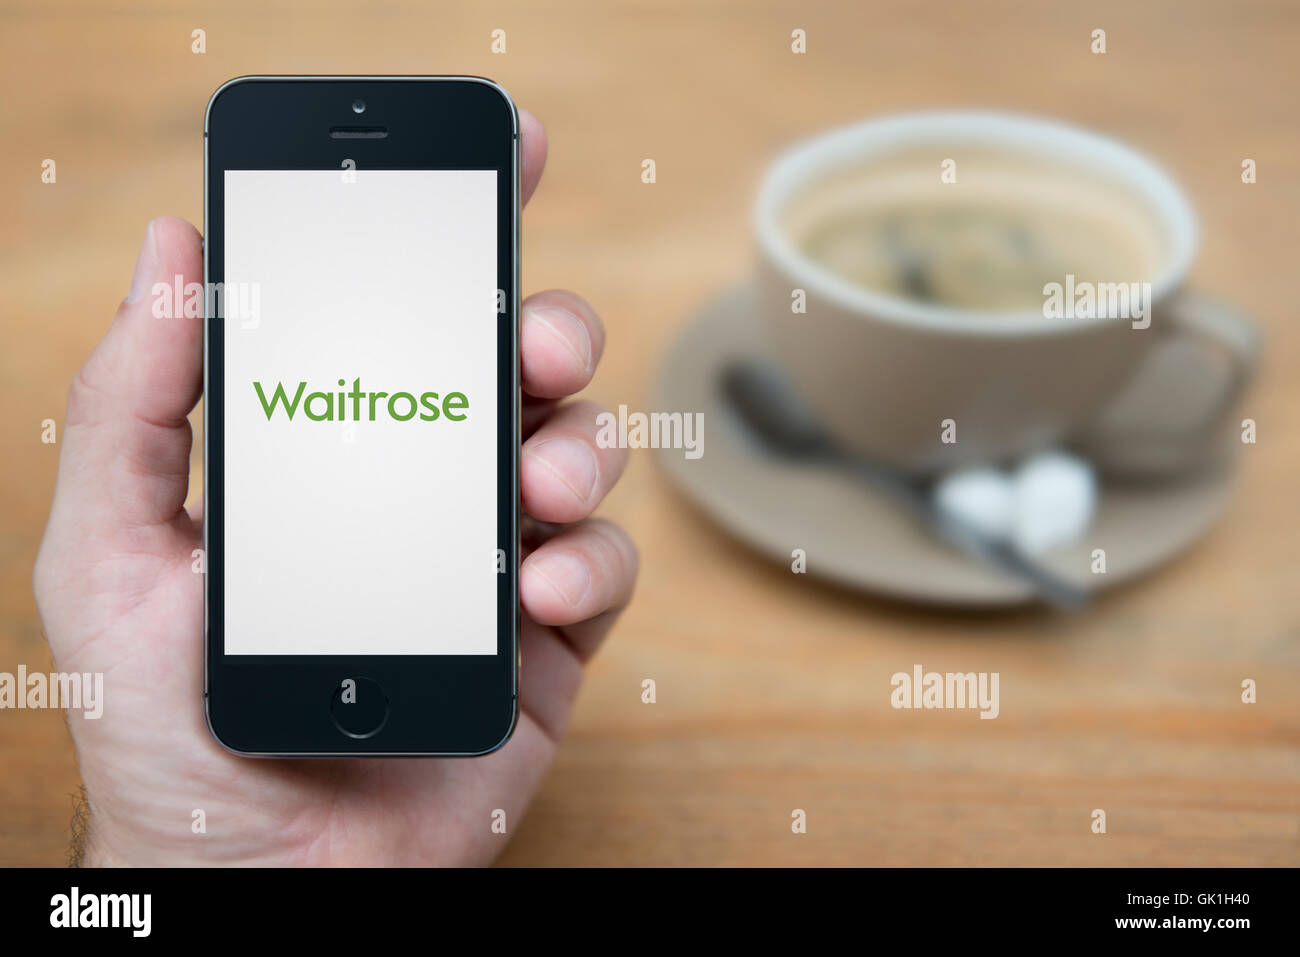 A man looks at his iPhone which displays the Waitrose logo, while sat with a cup of coffee (Editorial use only). Stock Photo